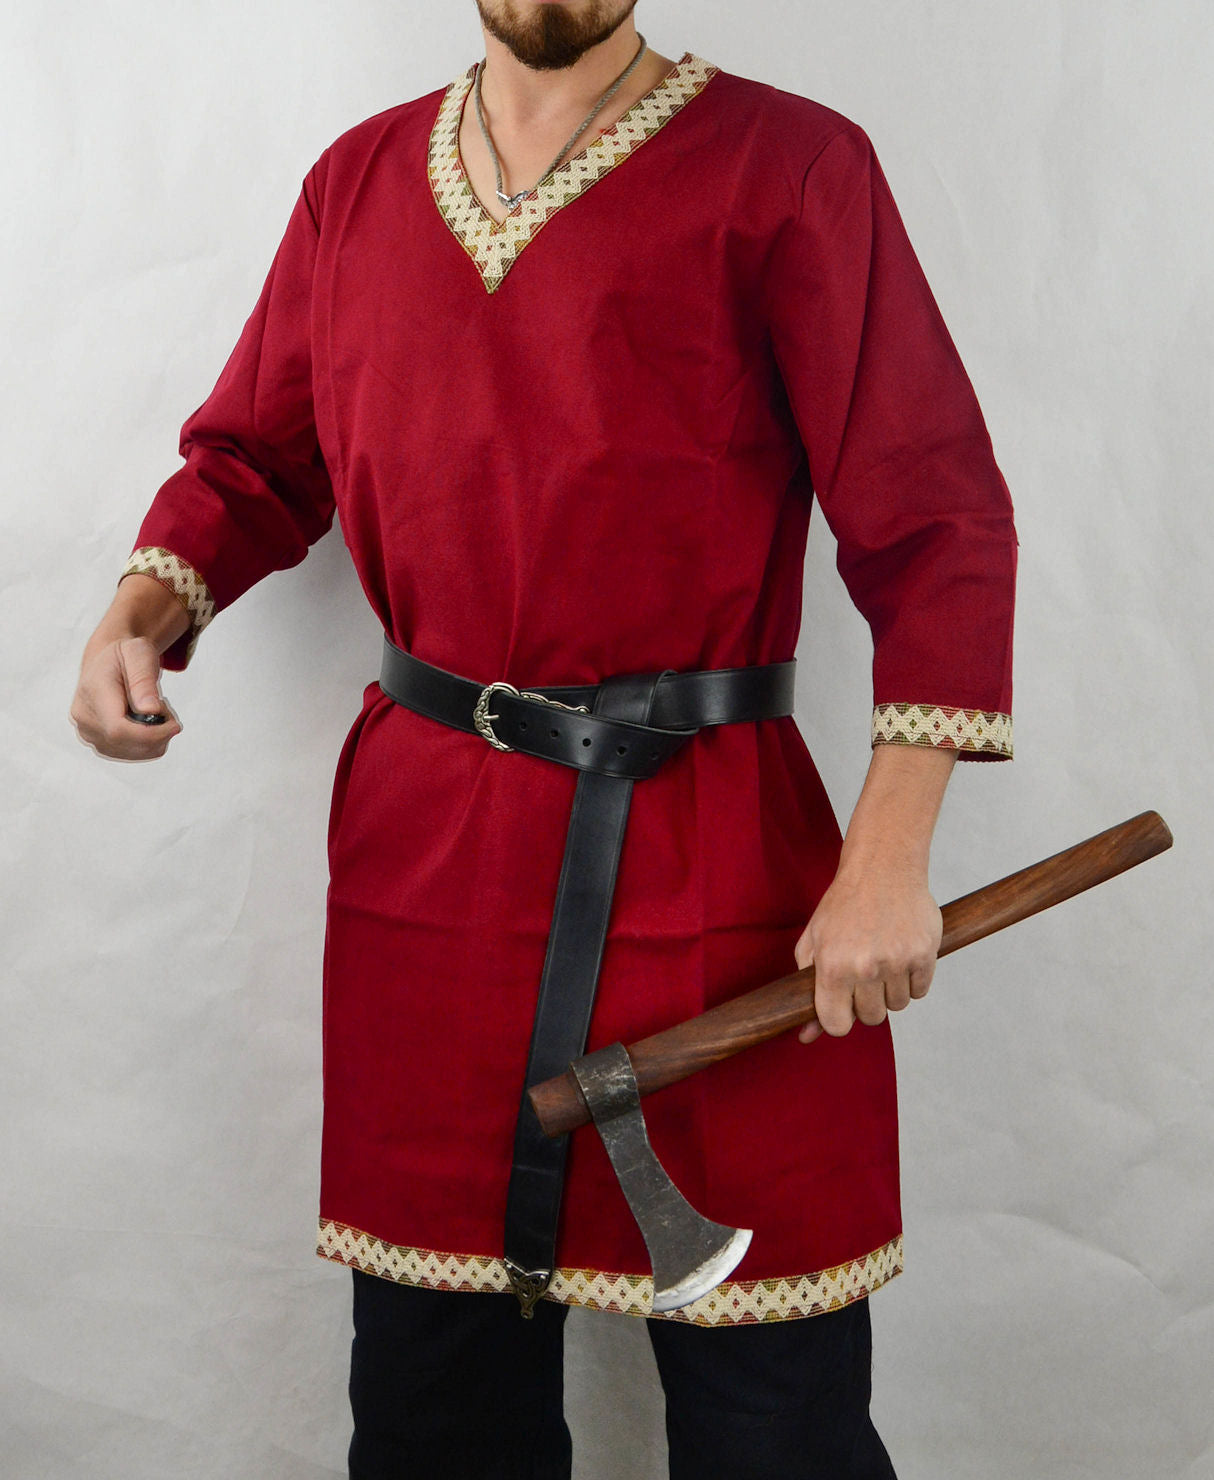 male model wearing a red Viking Tunic and holding an ax